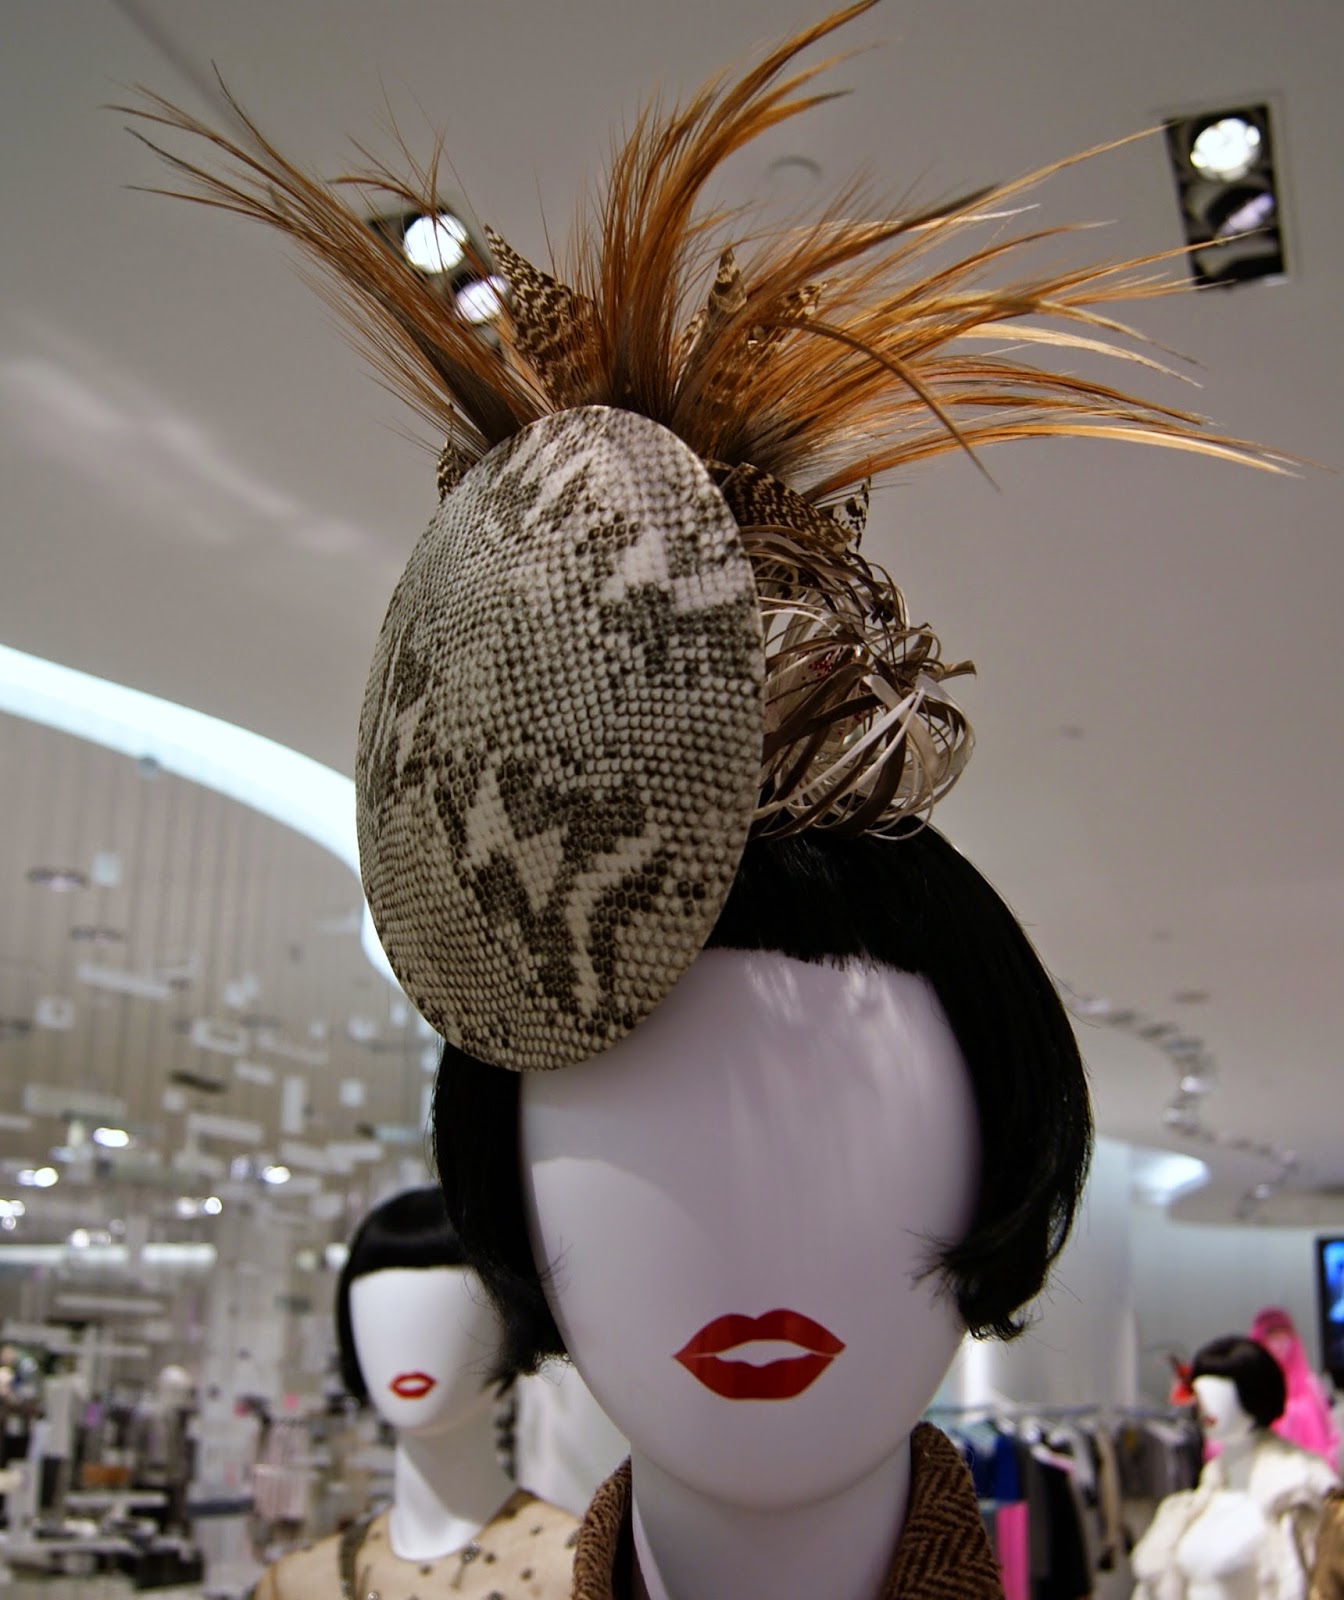 Fashion Blows Exhibit at Hudson's Bay in Toronto, Isabella, Daupne Guinness, Style, Culture, foundation, aleander mcqueen, philip treacy, suicide,the purple scarf, melanie.ps, ontario, canada, the room, Phiip Treacy, snakeskin, dome, hat